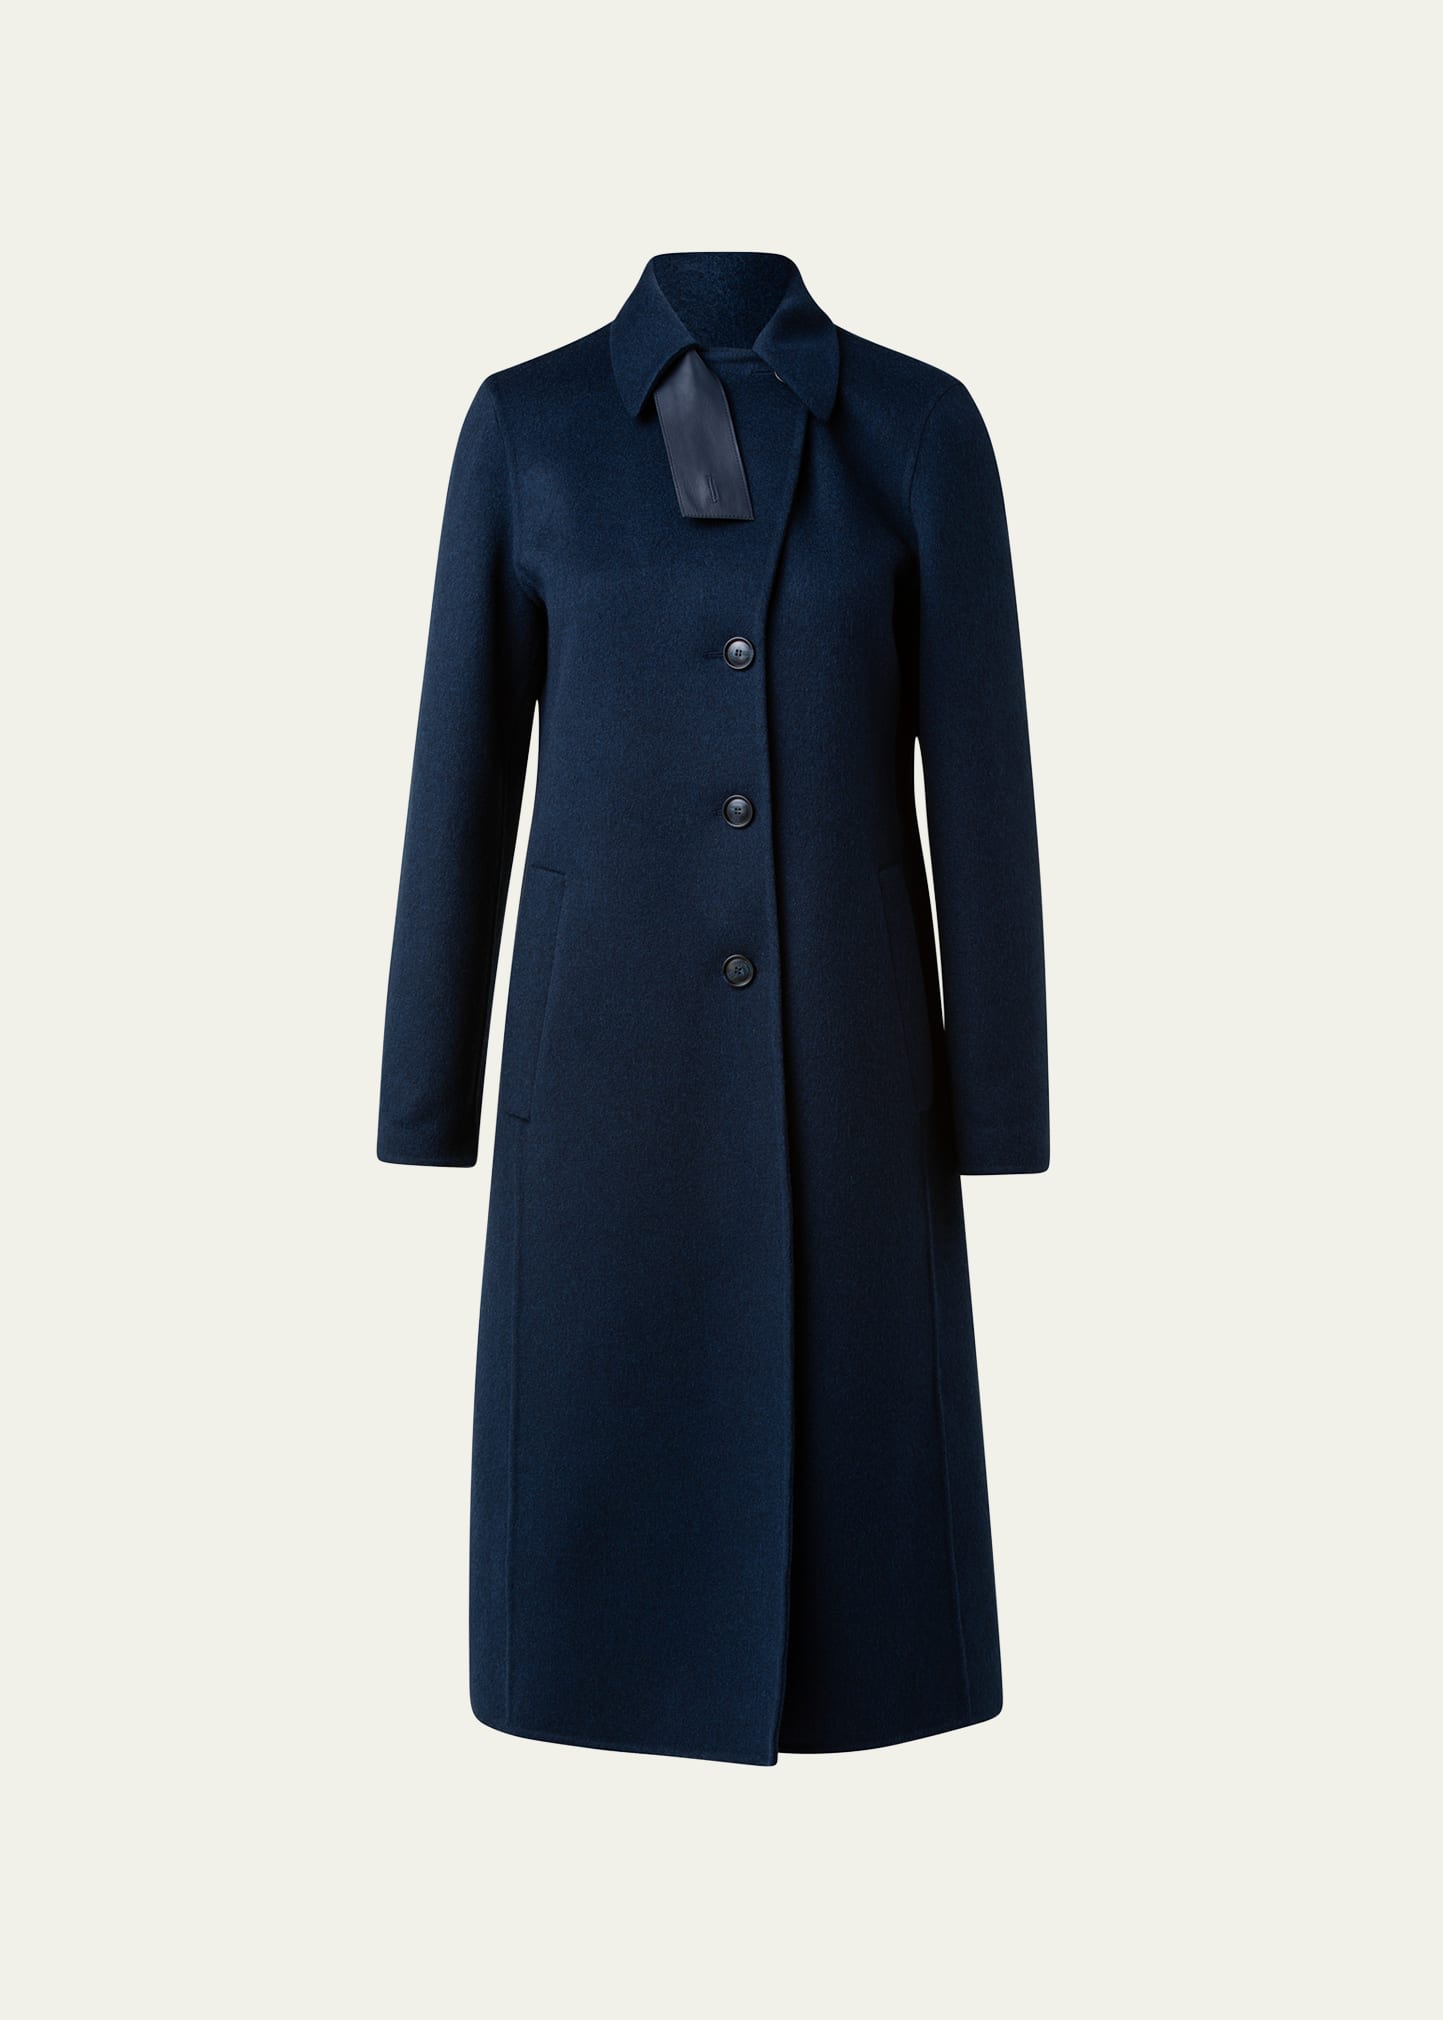 Cashmere Double-Face Coat w/ Leather Strap